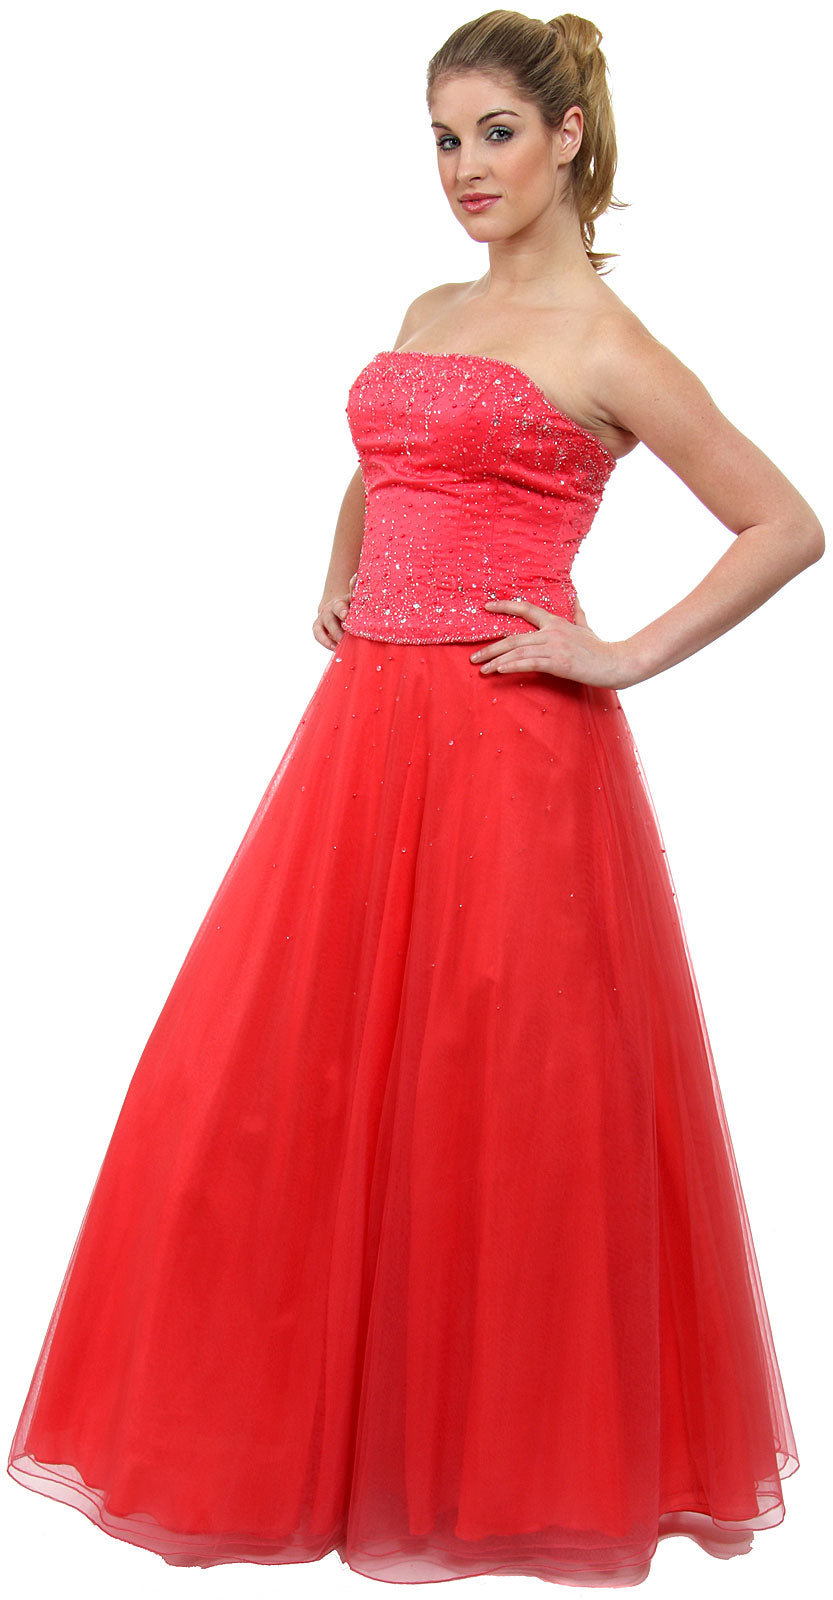 Main image of Watermelon A-line Beaded Prom Dress